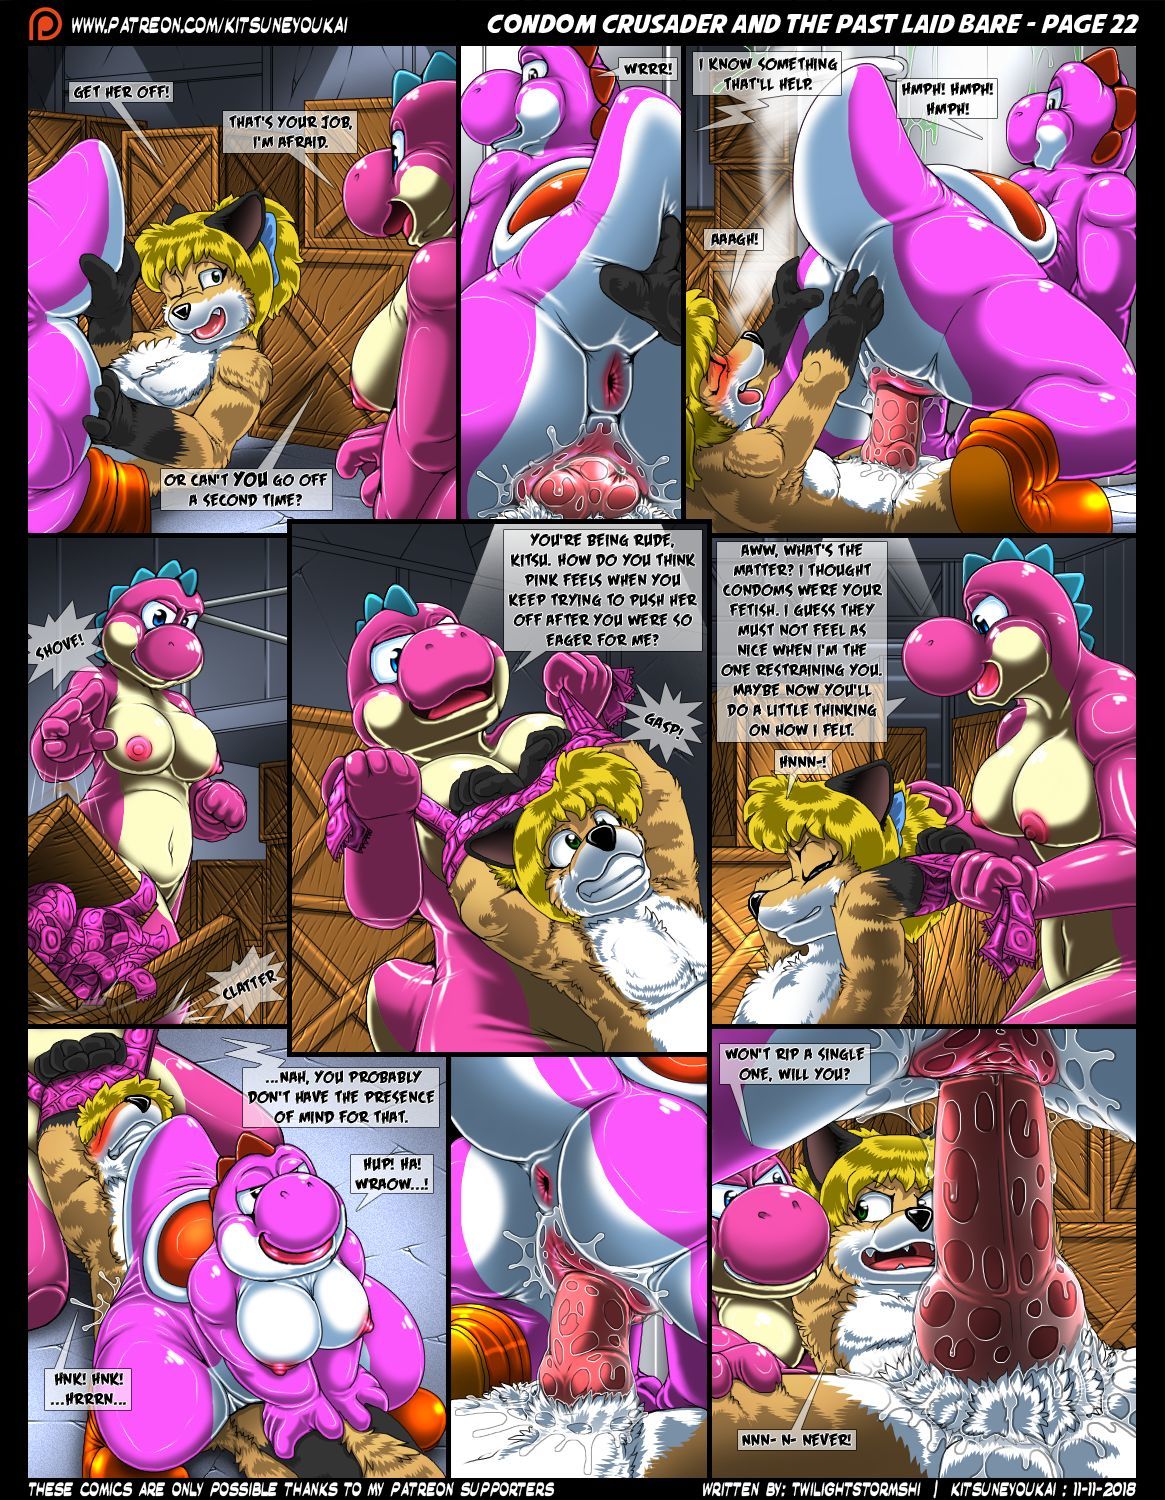 Condom Crusader and the Past Laid Bare by kitsuneyoukai page 22